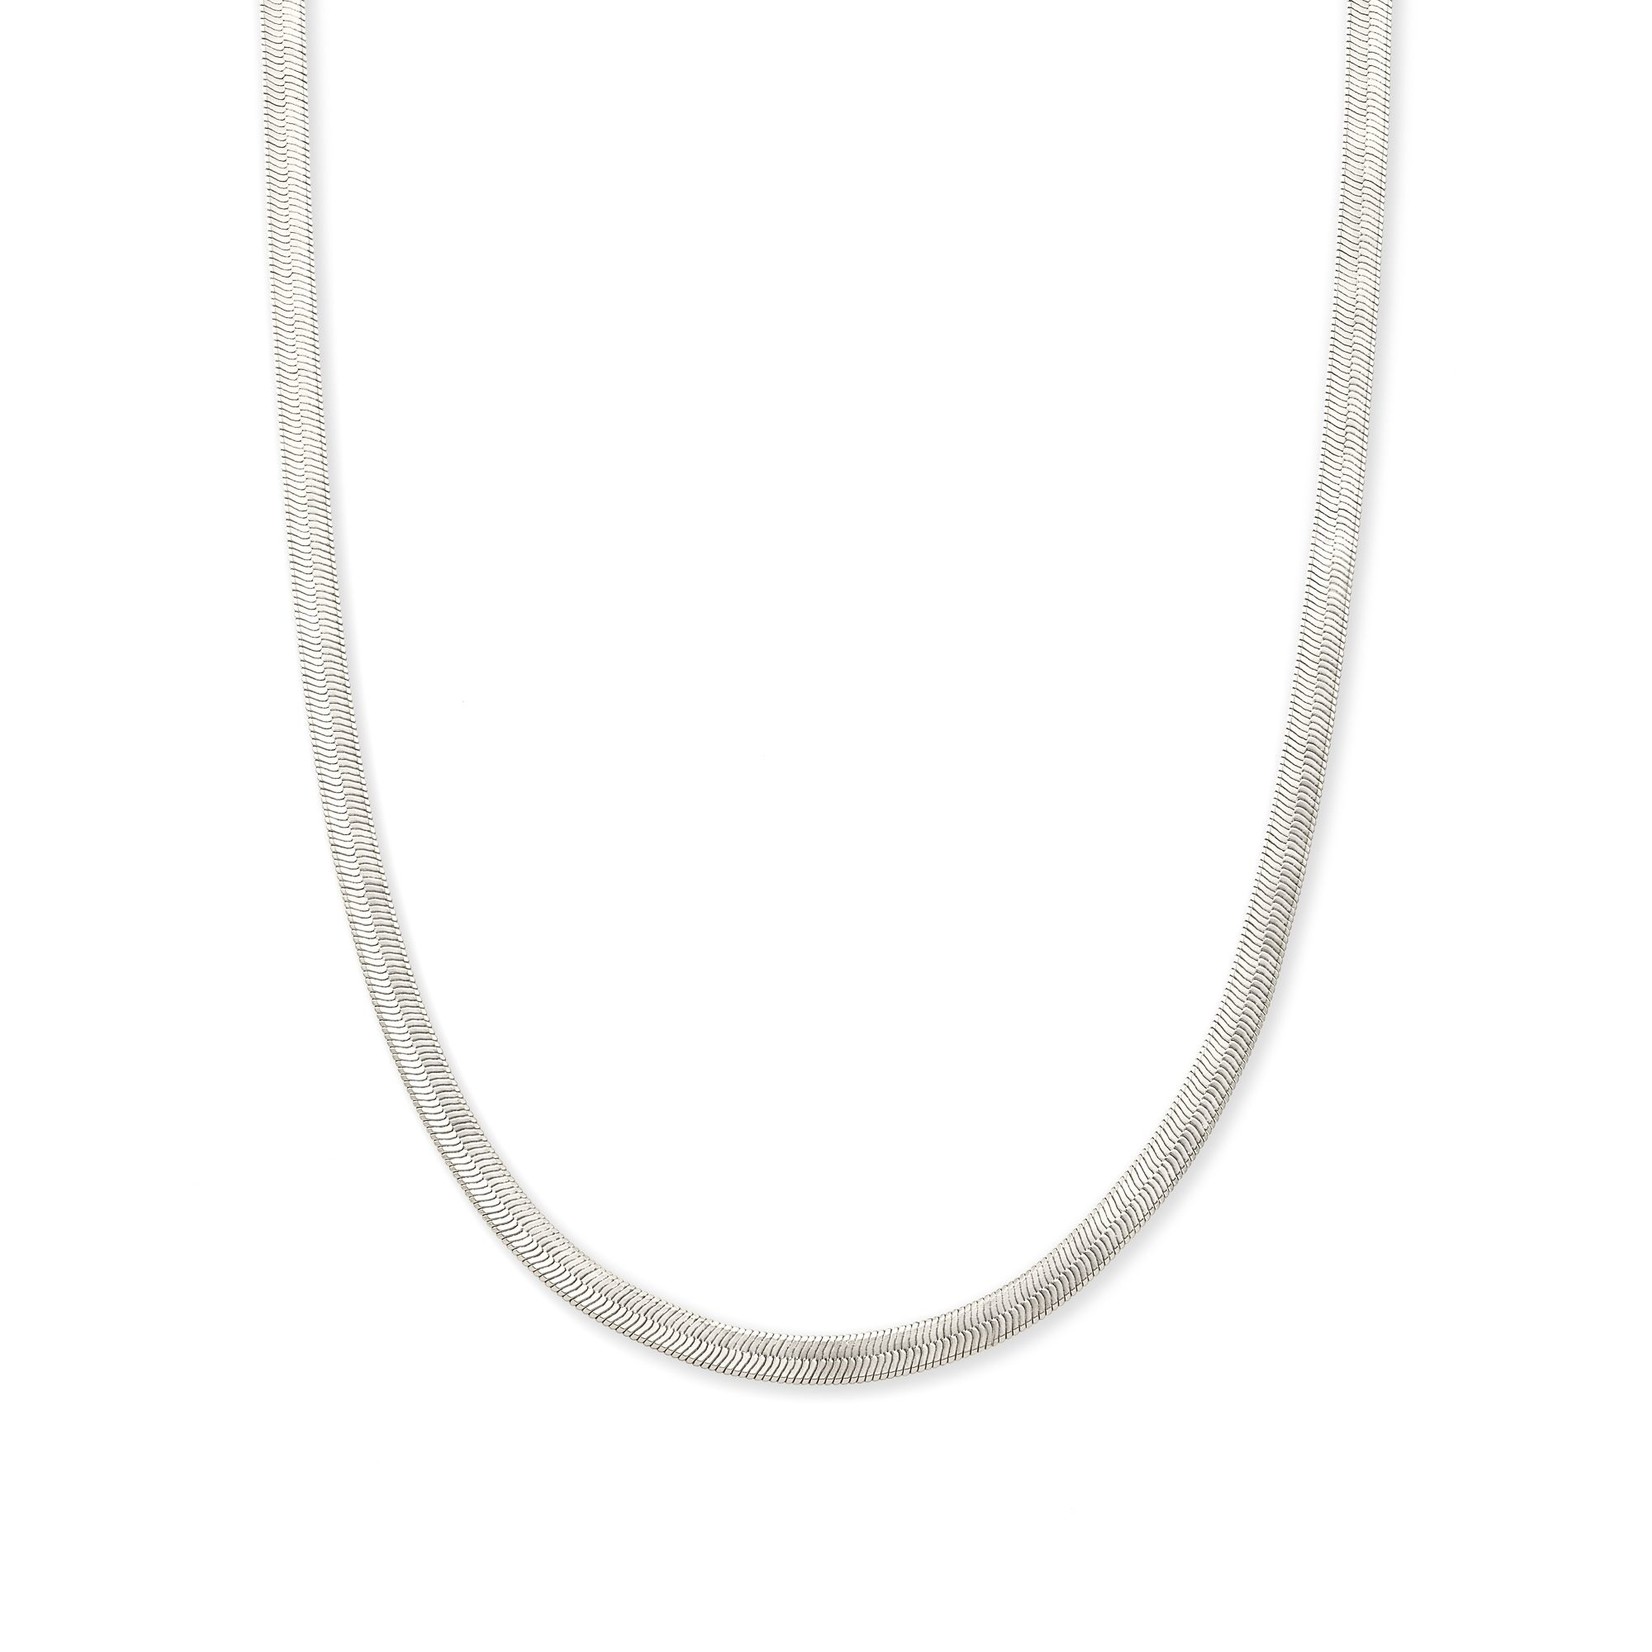 The Kassie Chain Necklace